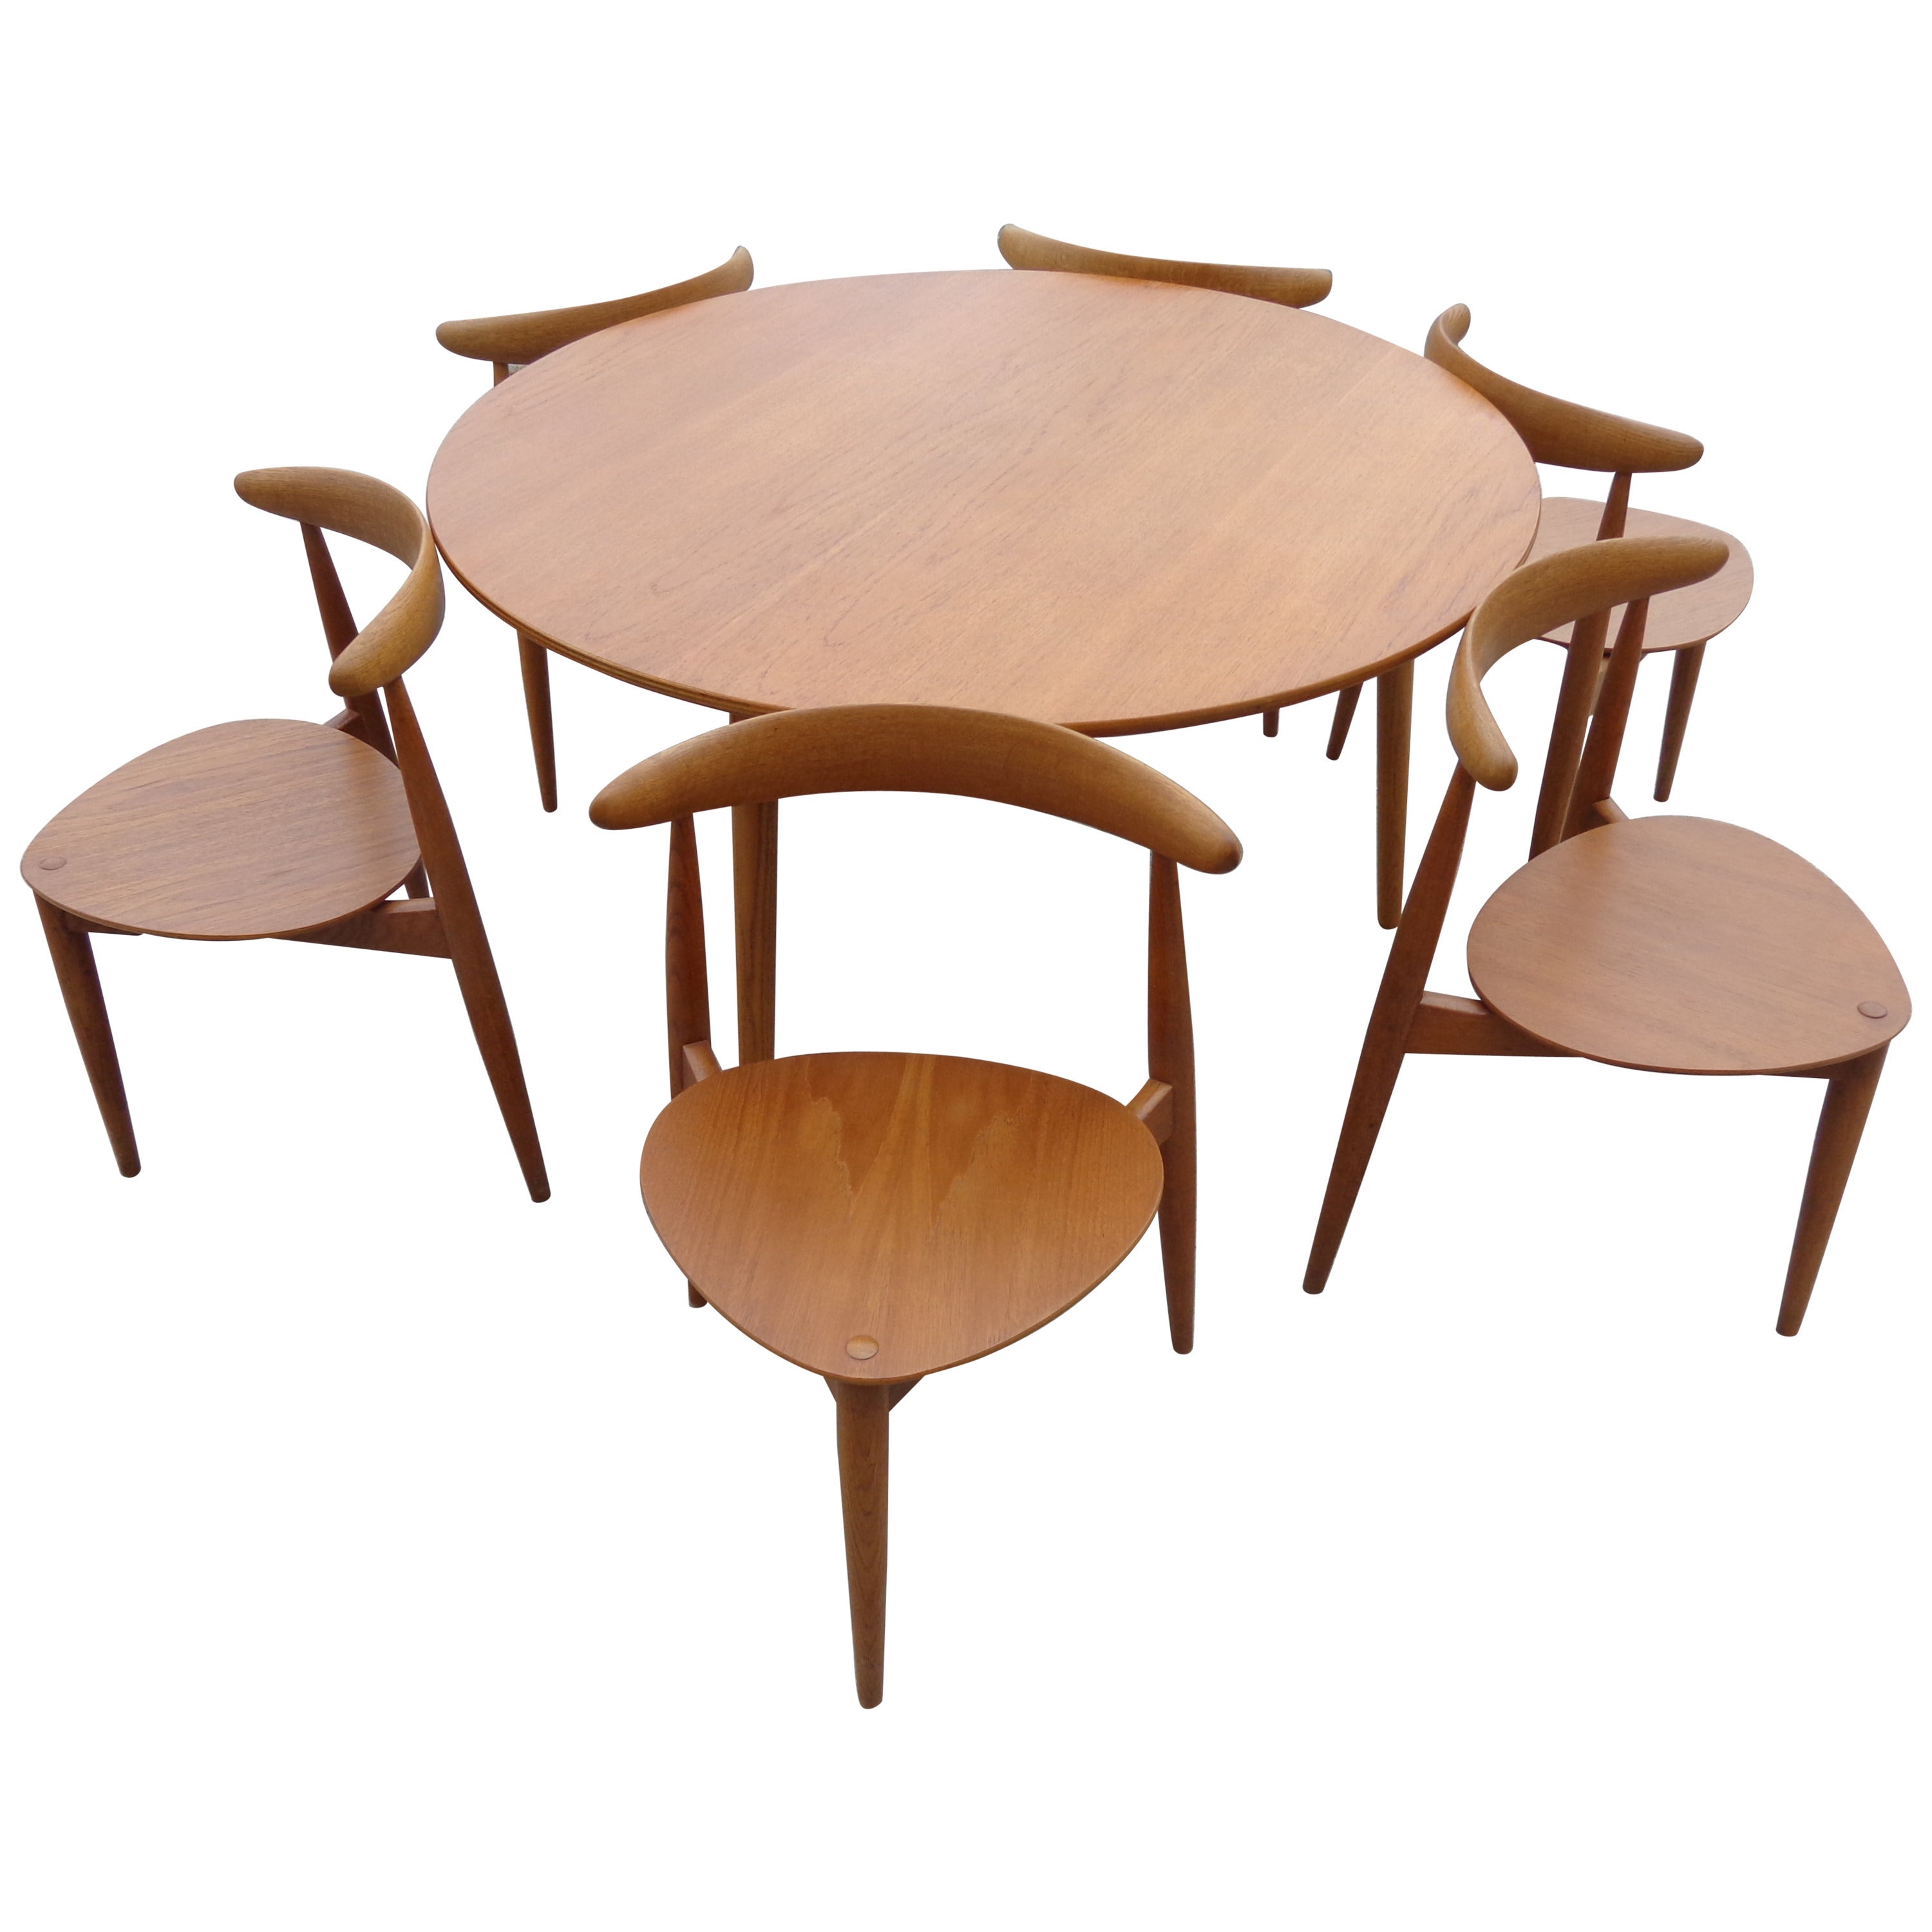 Hans J Wegner Heart chairs and matching table set